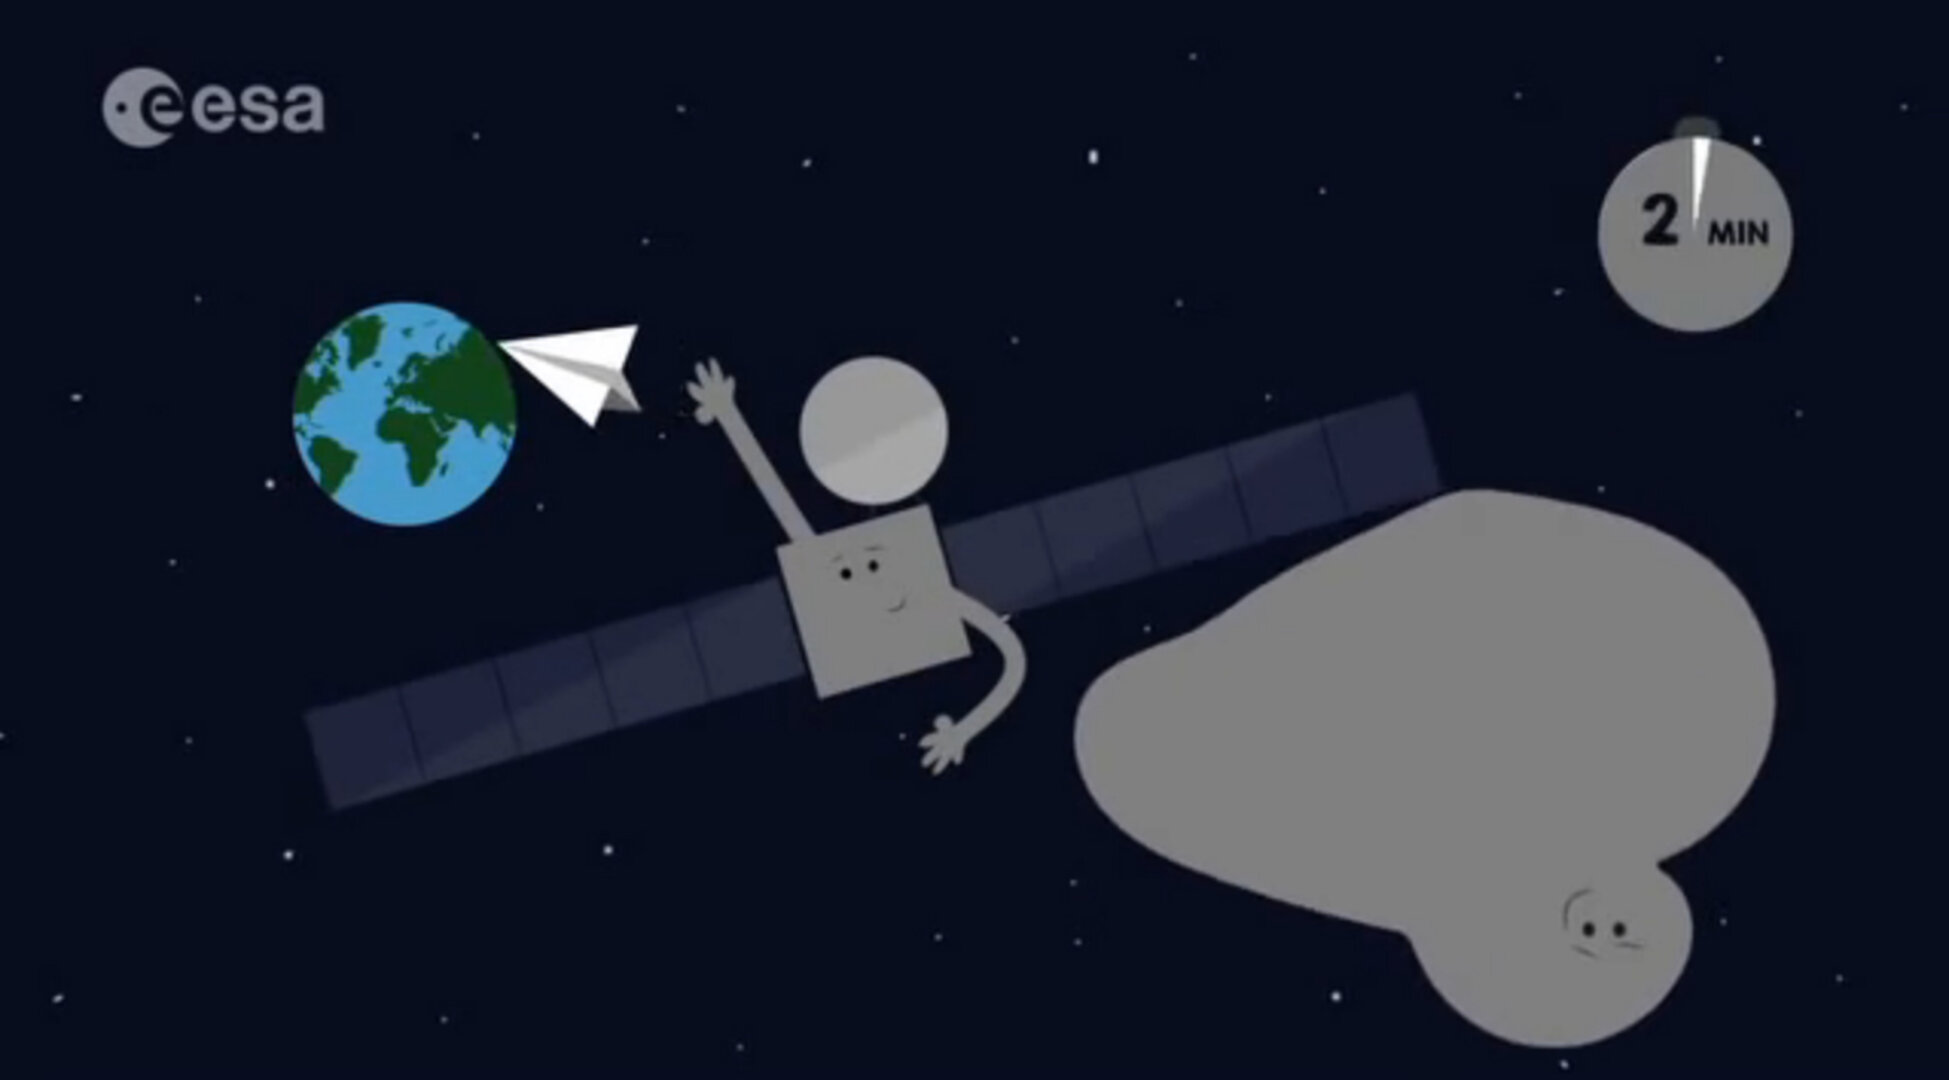 How long does it take for Rosetta to transmit a signal to Earth? 